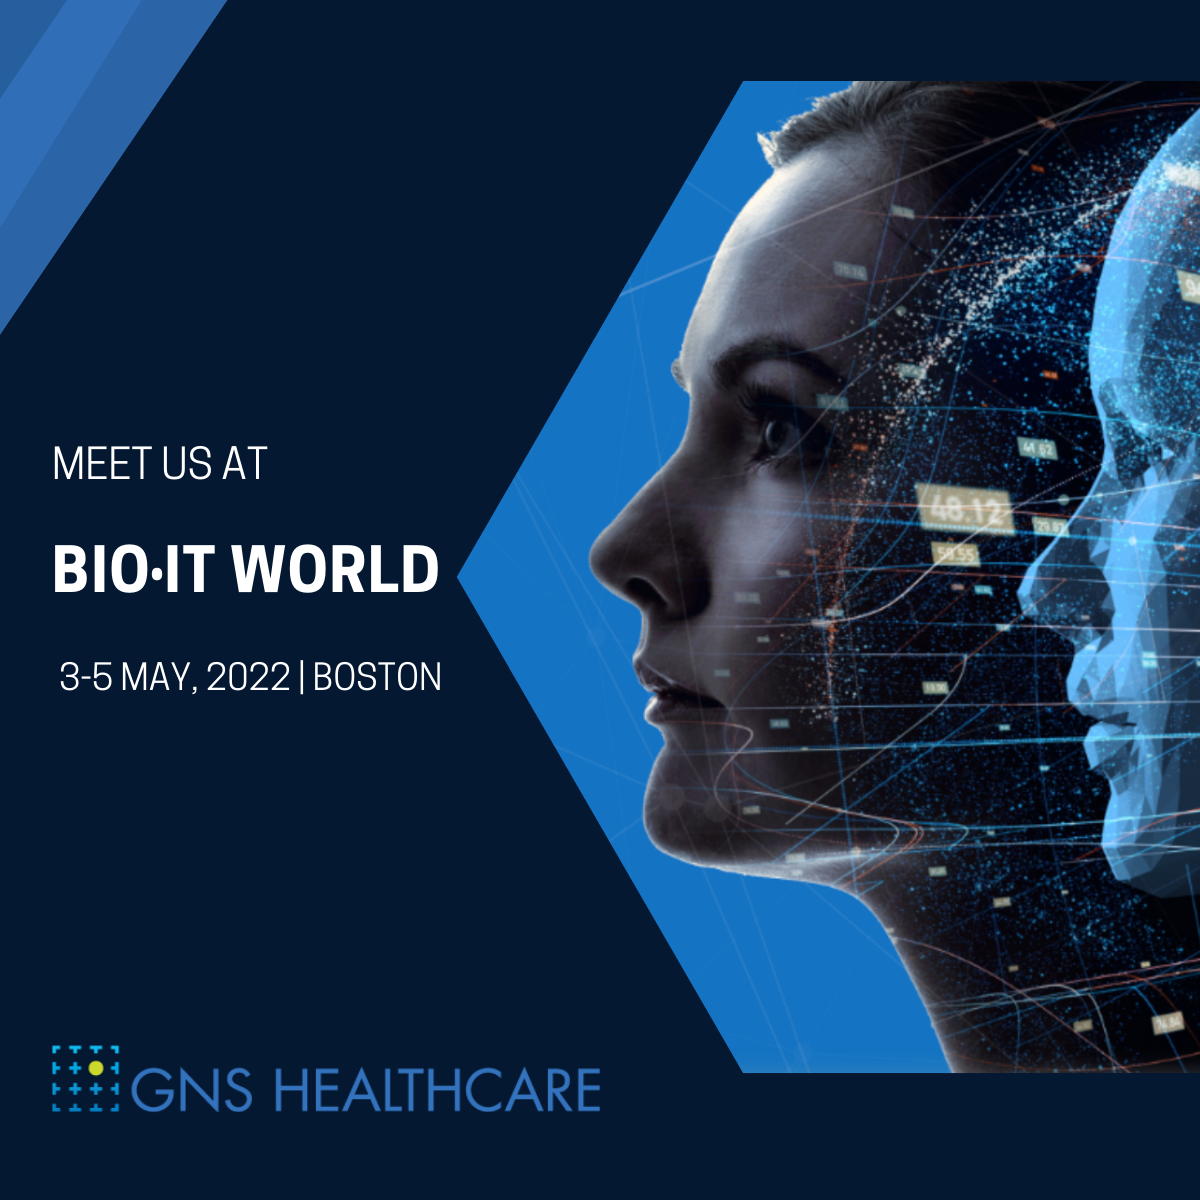 Meet us at Bio-IT World Conference & Expo 2022